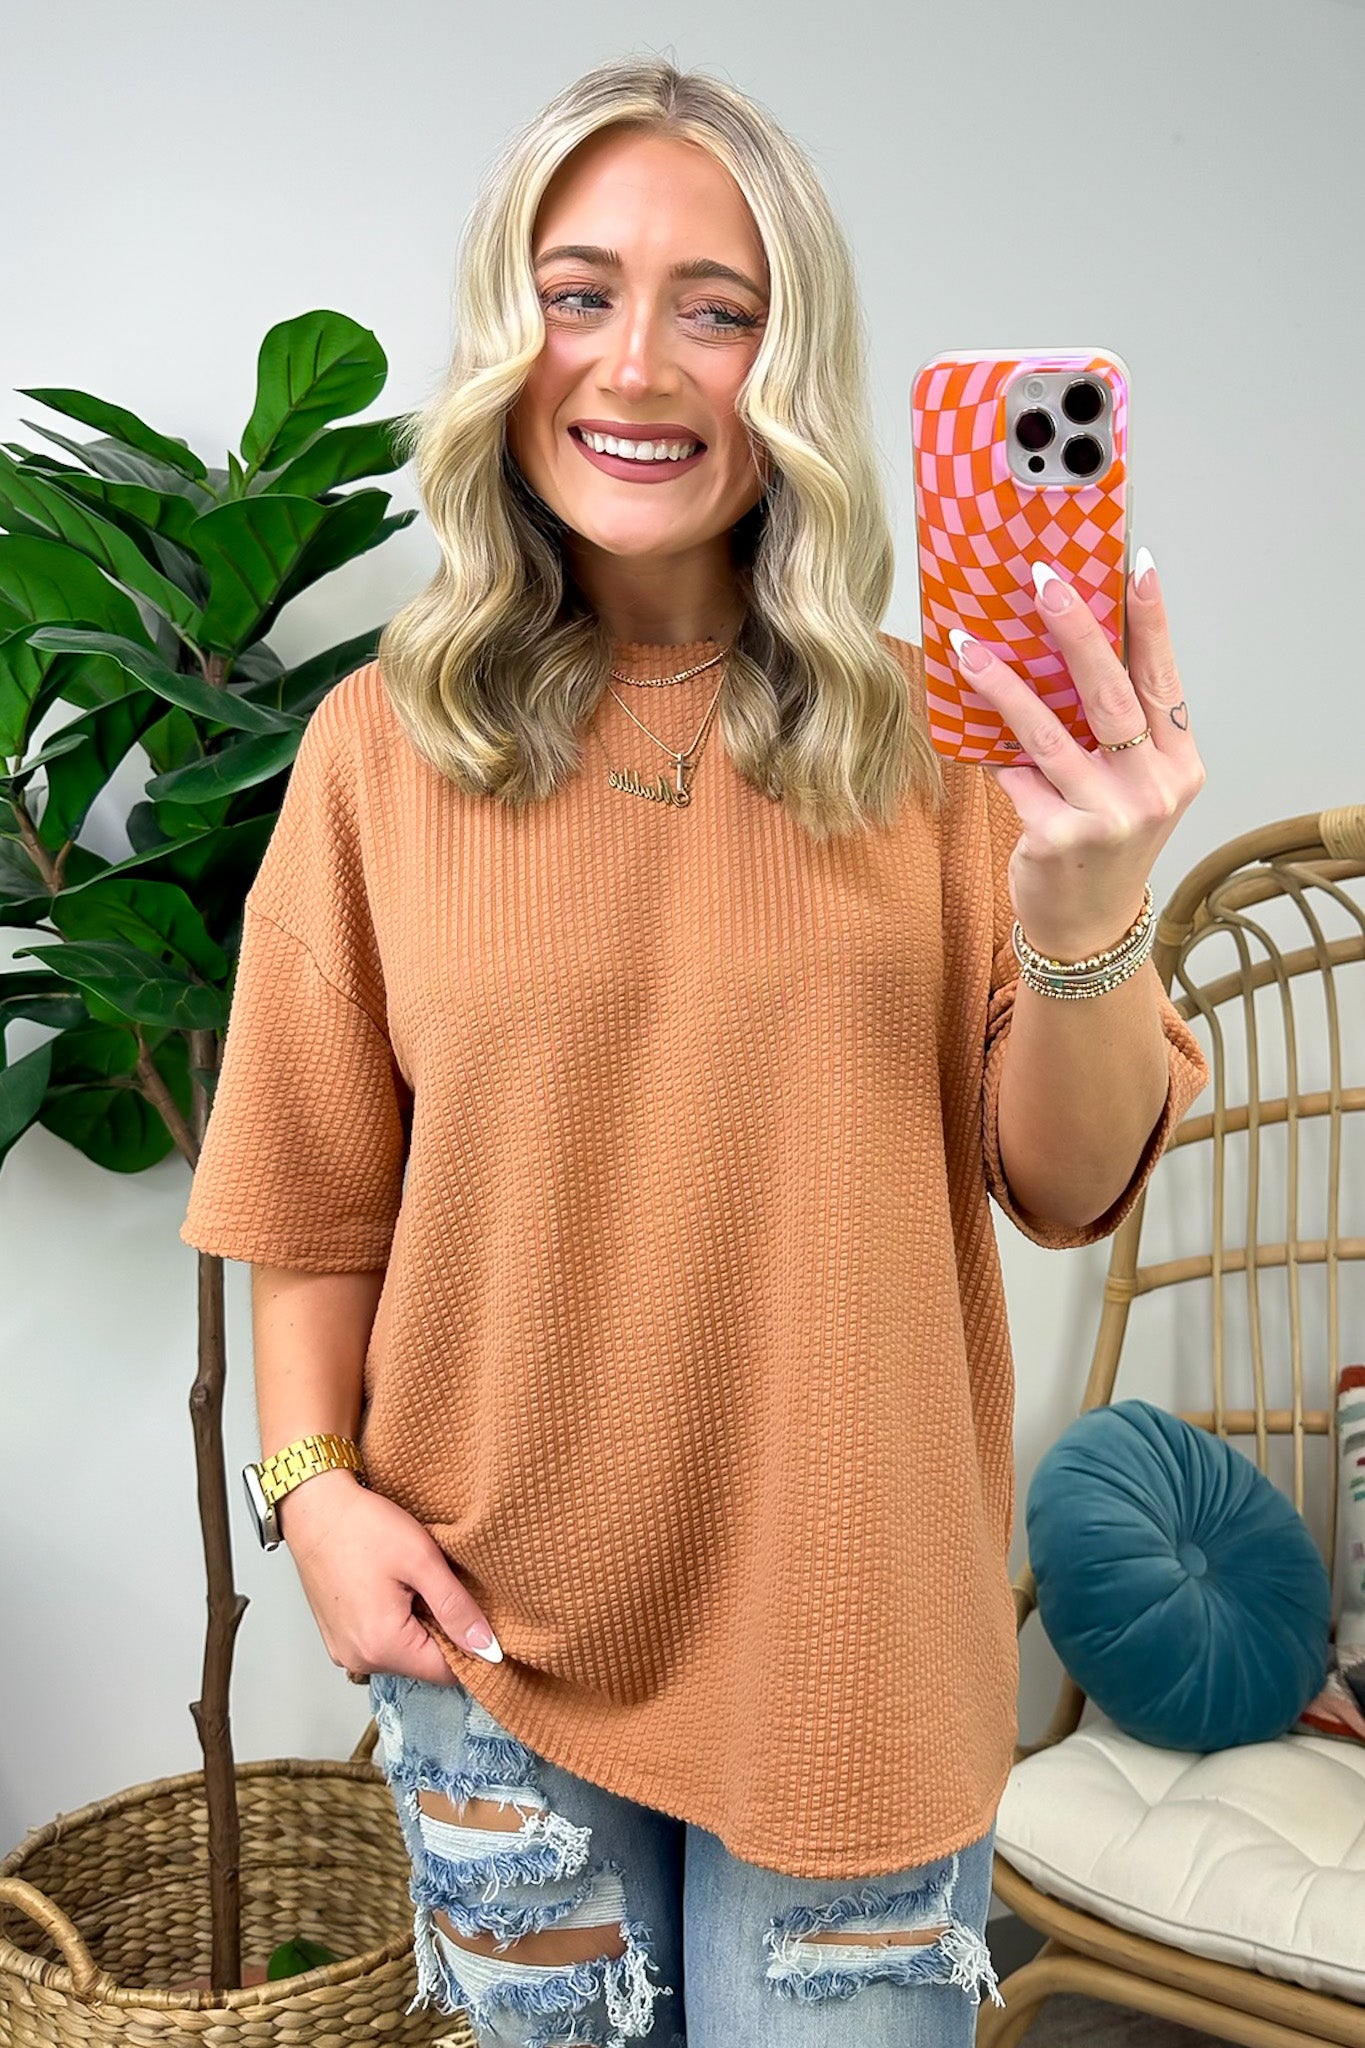  Colettie Jacquard Knit Top - Madison and Mallory